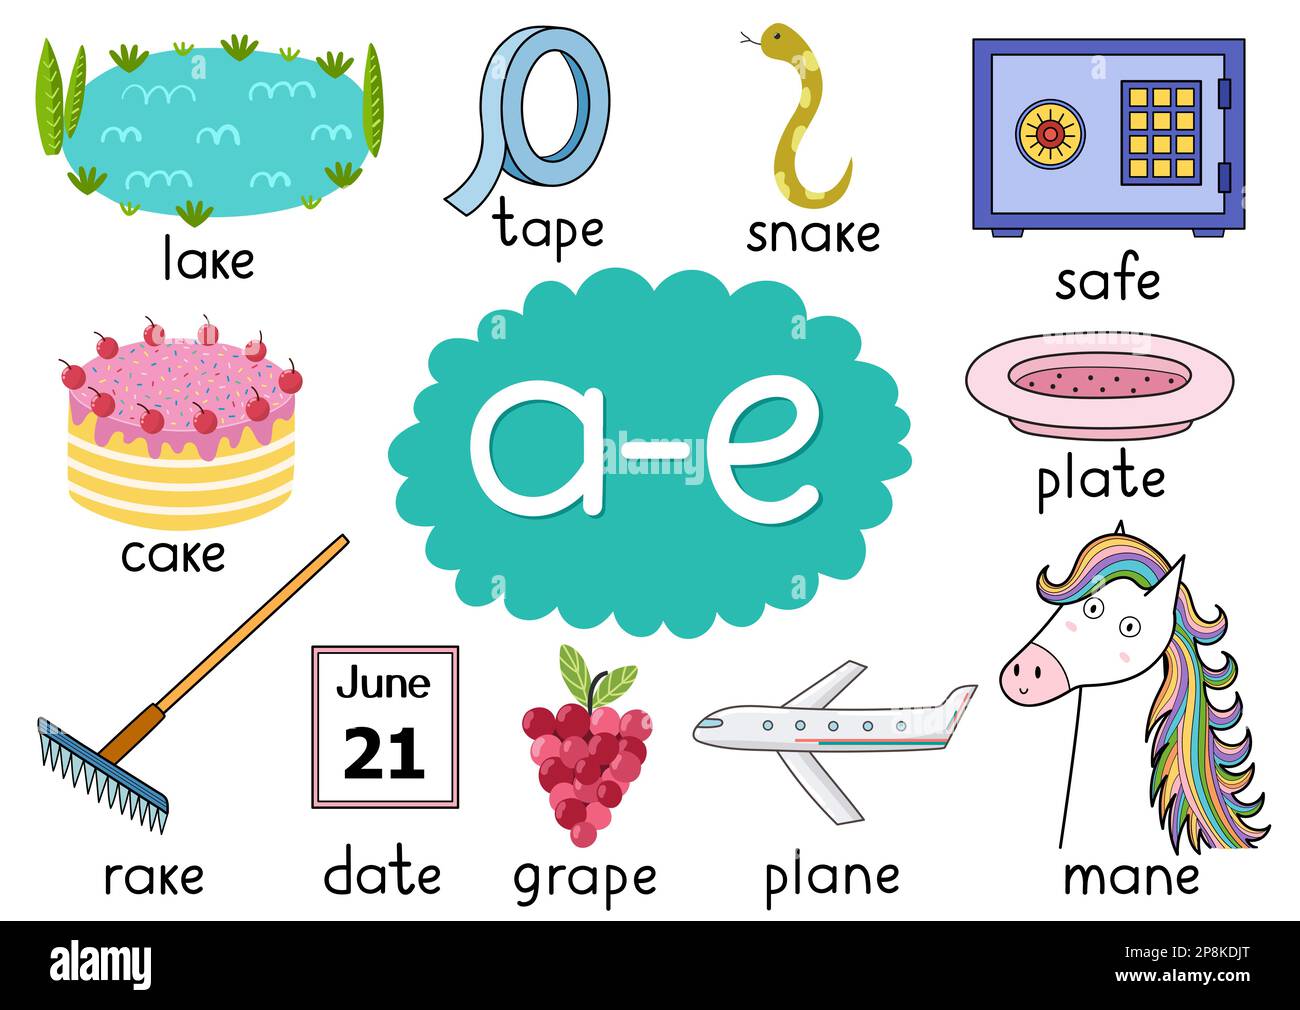 A-e digraph spelling rule educational poster set for kids  Stock Vector